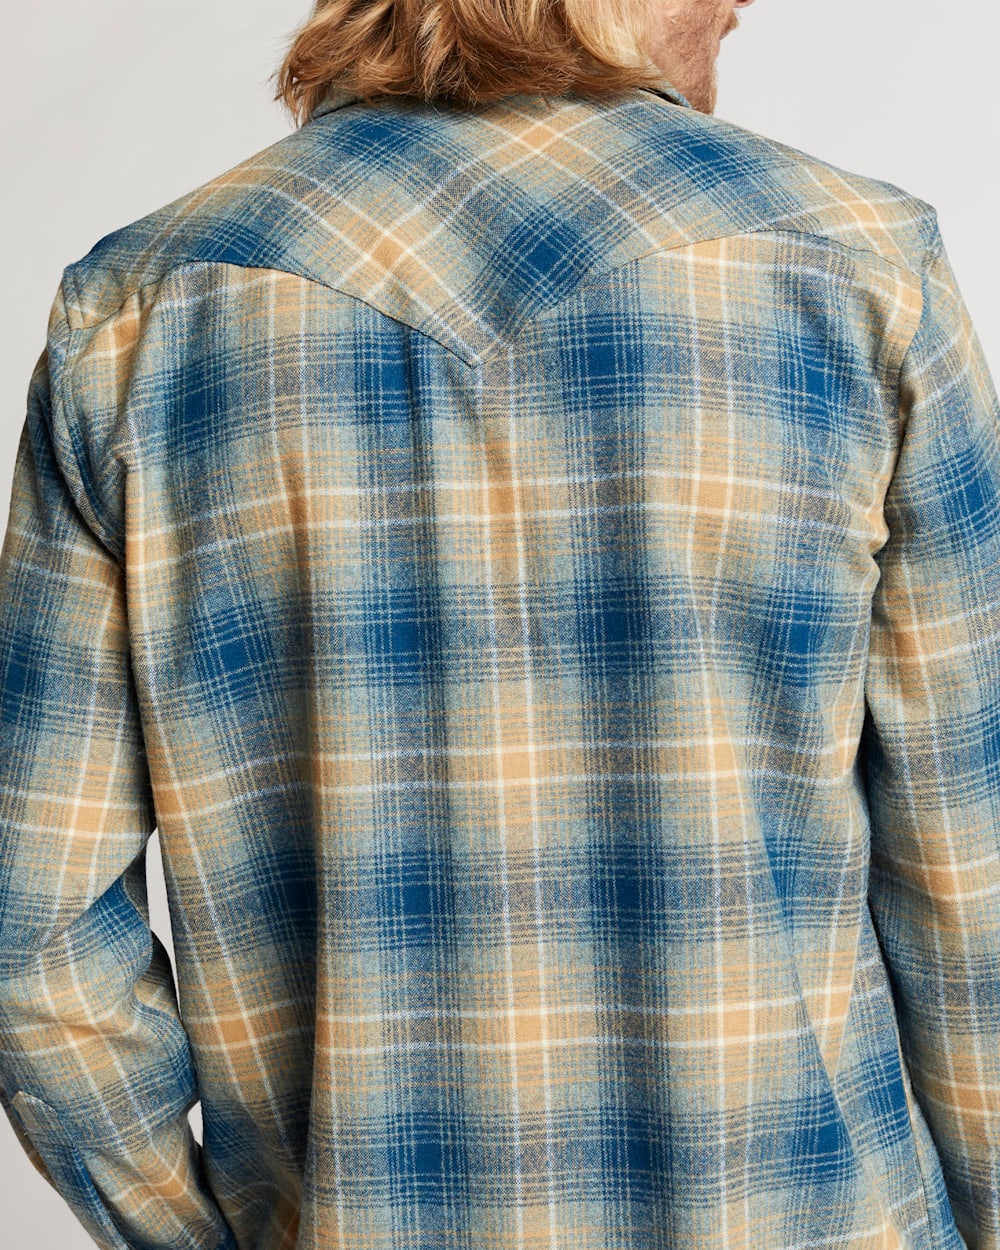 ALTERNATE VIEW OF MEN'S PLAID SNAP-FRONT WESTERN CANYON SHIRT IN TAN/BLUE MIX PLAID image number 4